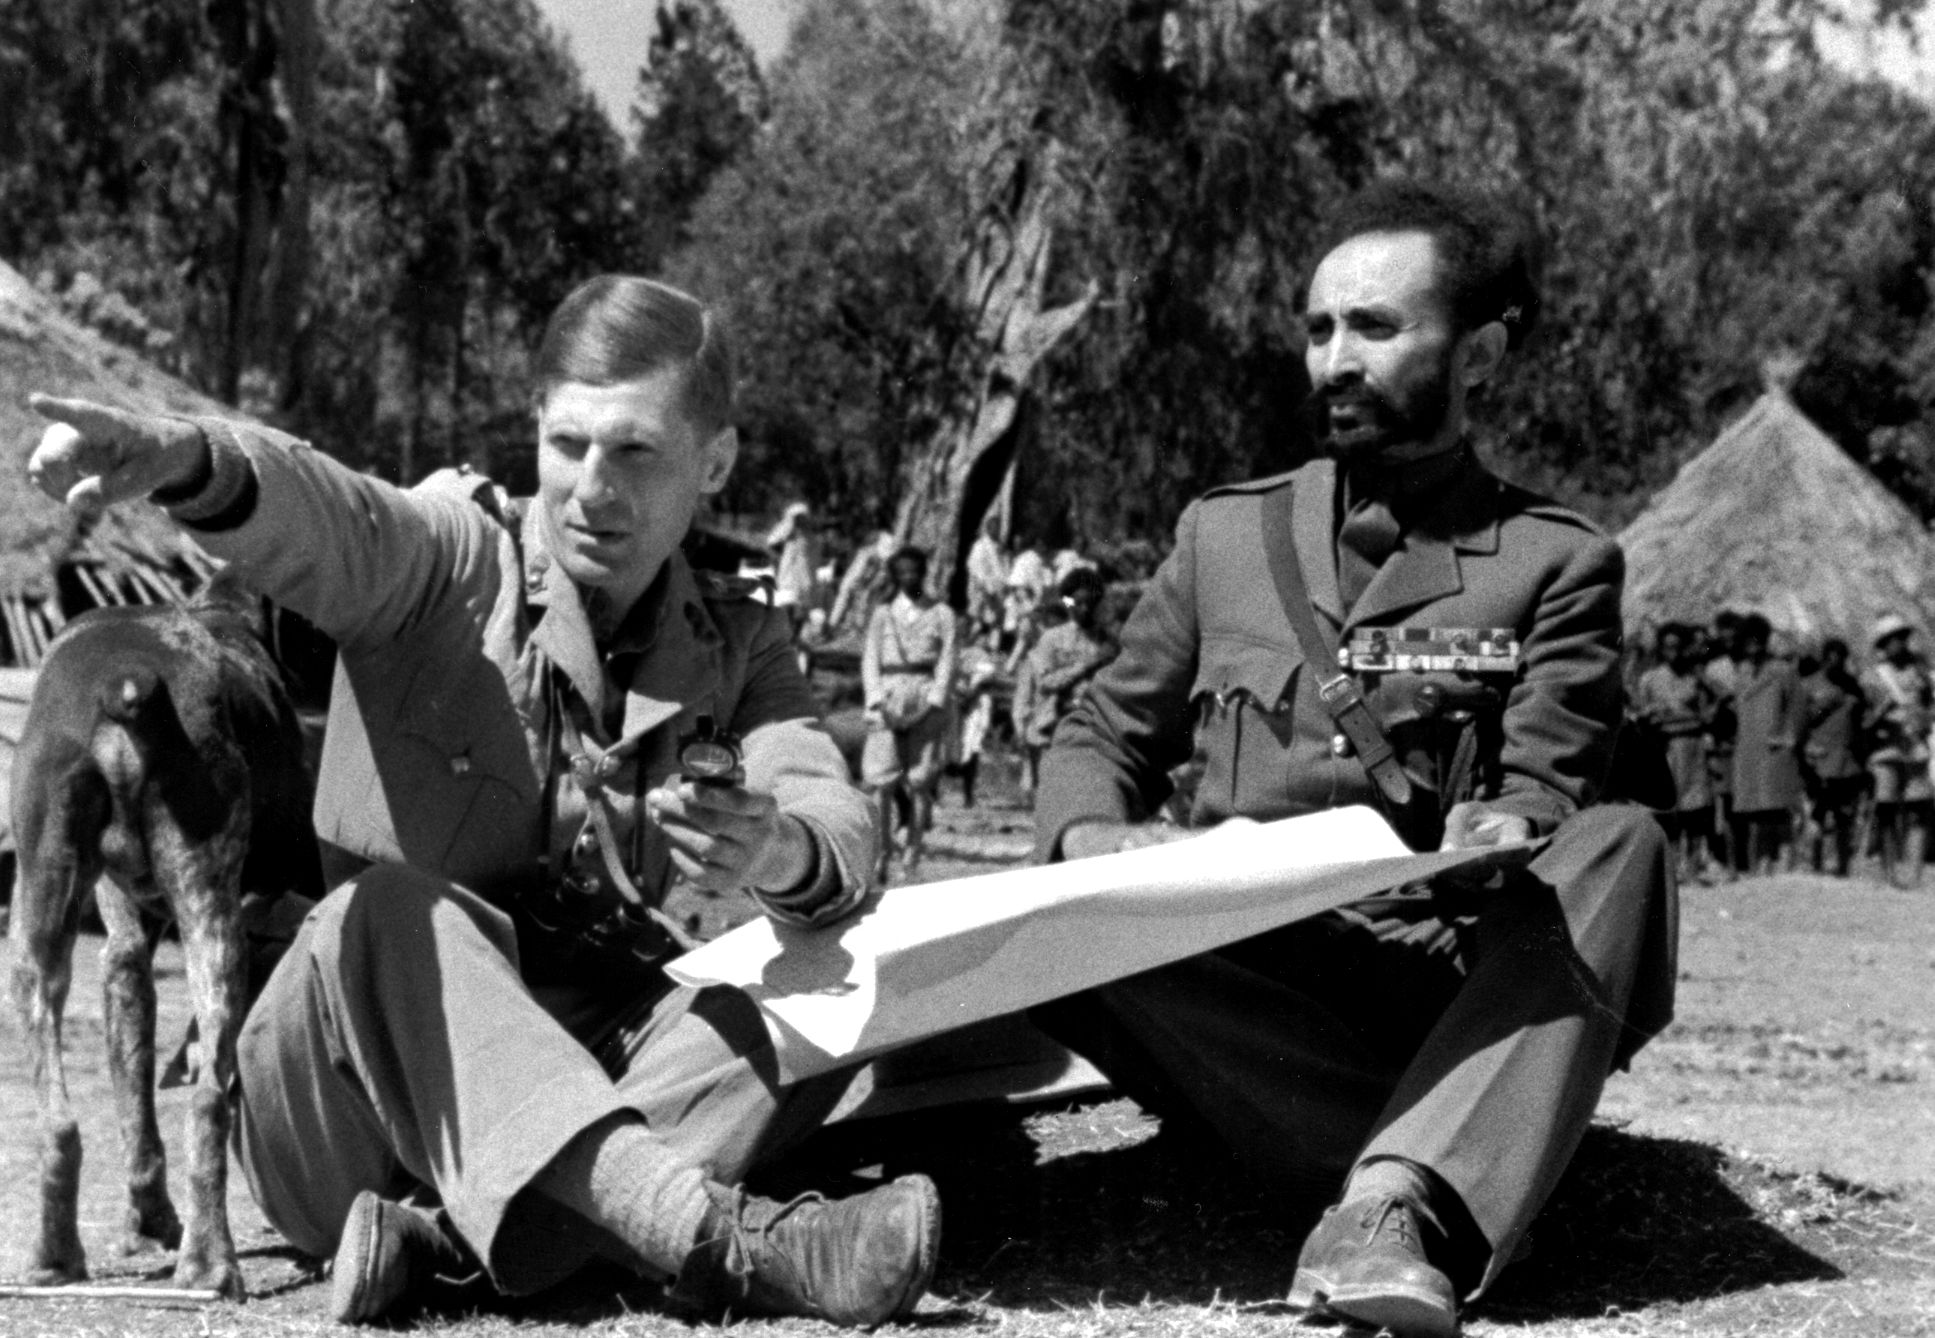 In a rare photo showing Colonel Orde Wingate (left) in full uniform and clean shaven, the British officer briefs Ethiopian Emperor Haile Selassie on the progress of the Abyssinian Campaign in 1941.